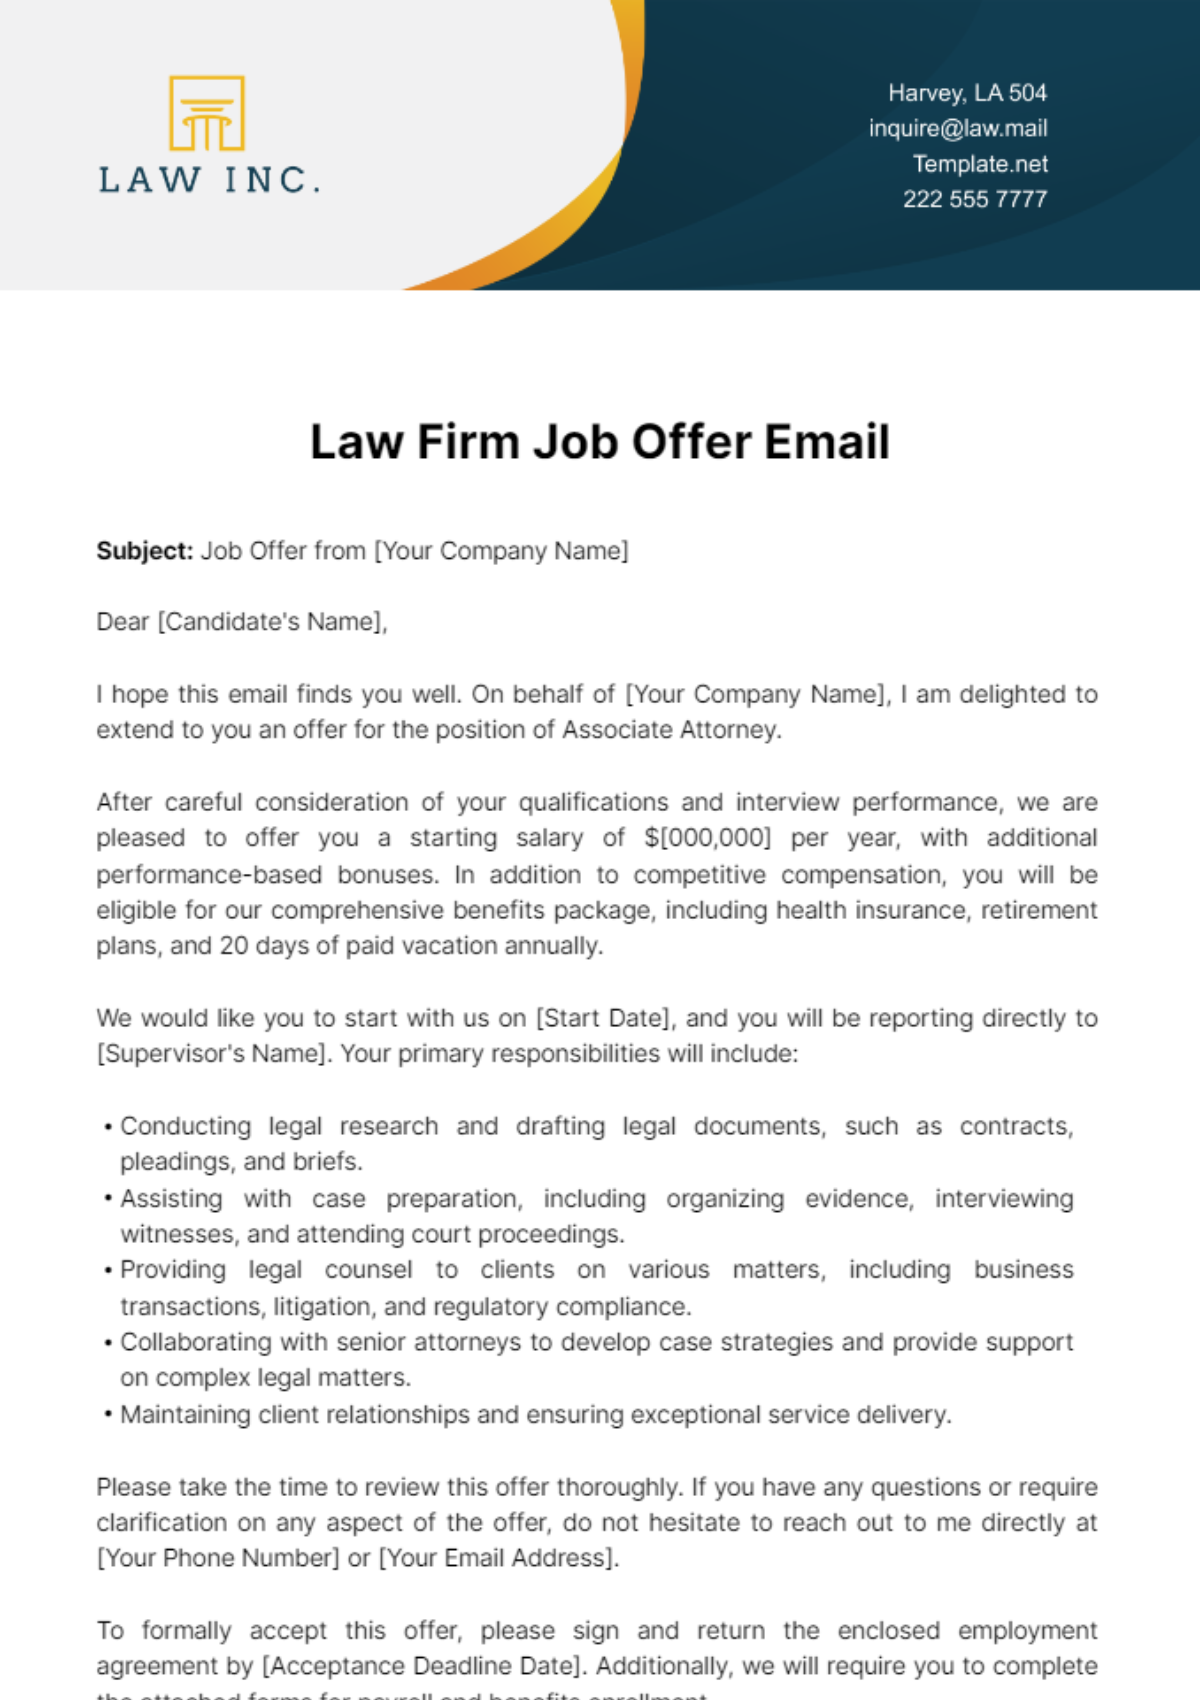 Law Firm Job Offer Email Template